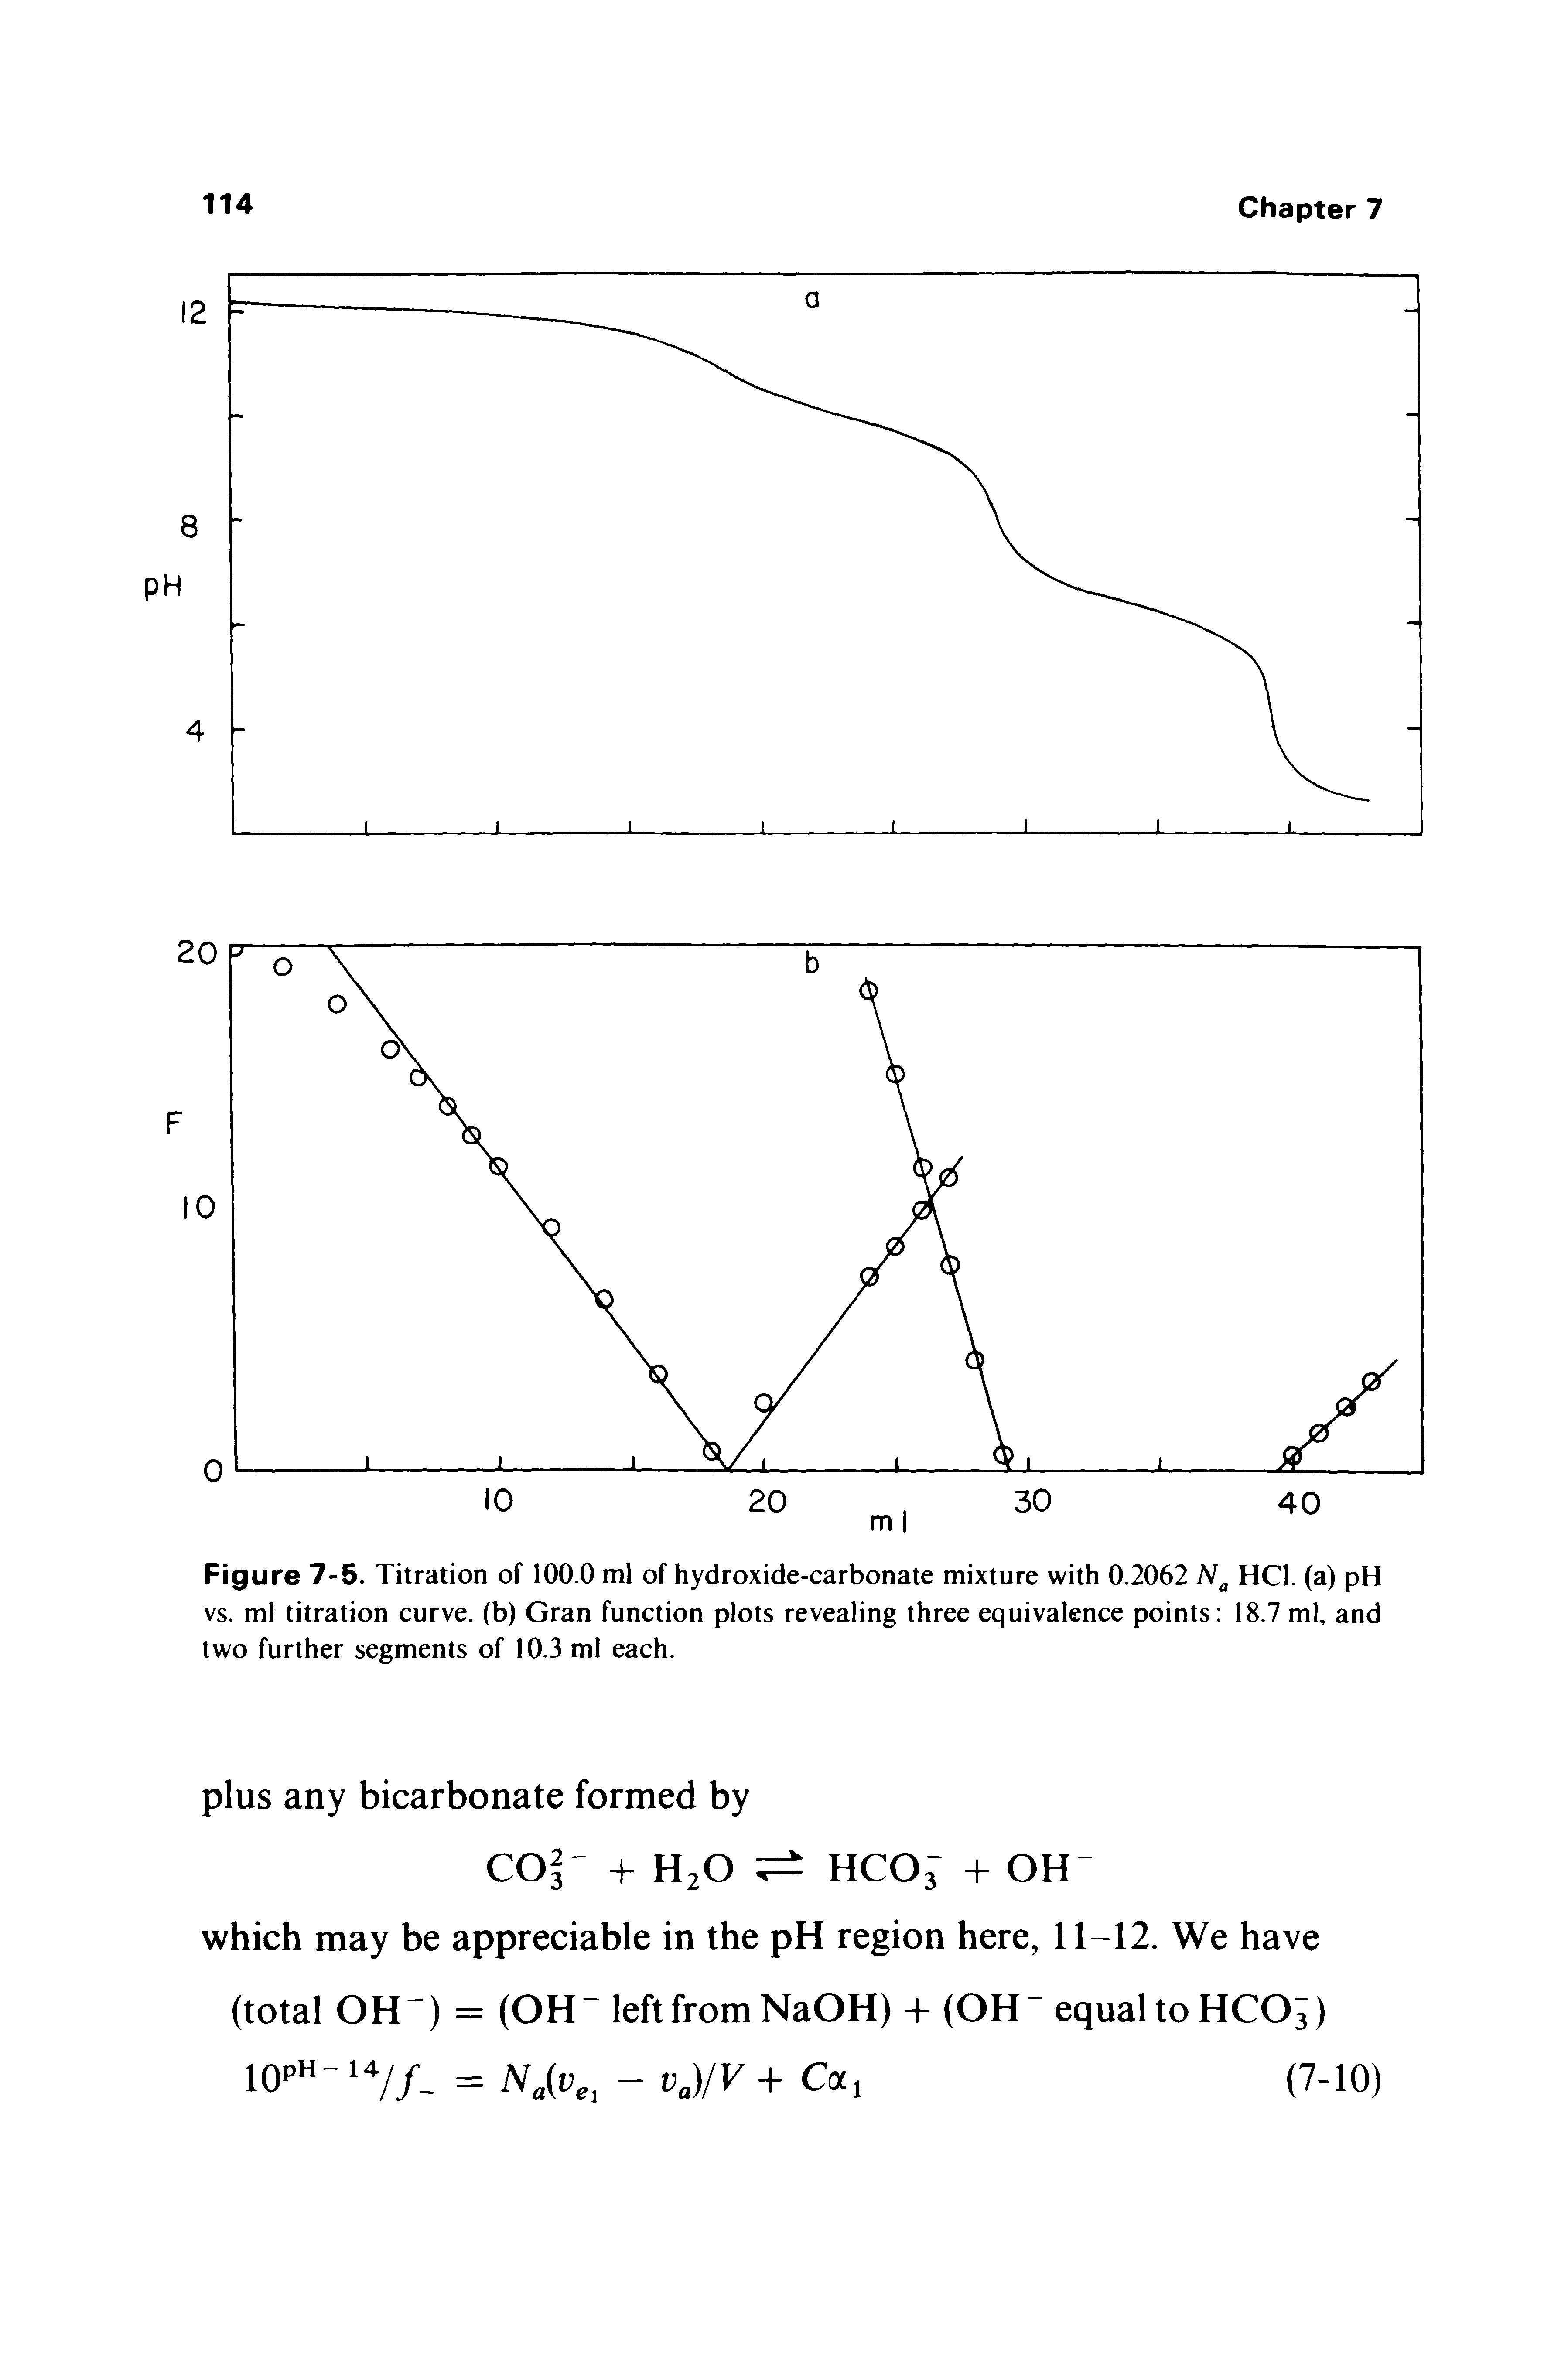 Figure 7-5. Titration of 100.0 ml of hydroxide-carbonate mixture with 0.2062 HCl. (a) pH vs. ml titration curve, (b) Gran function plots revealing three equivalence points 18.7 ml, and two further segments of 10.3 ml each.